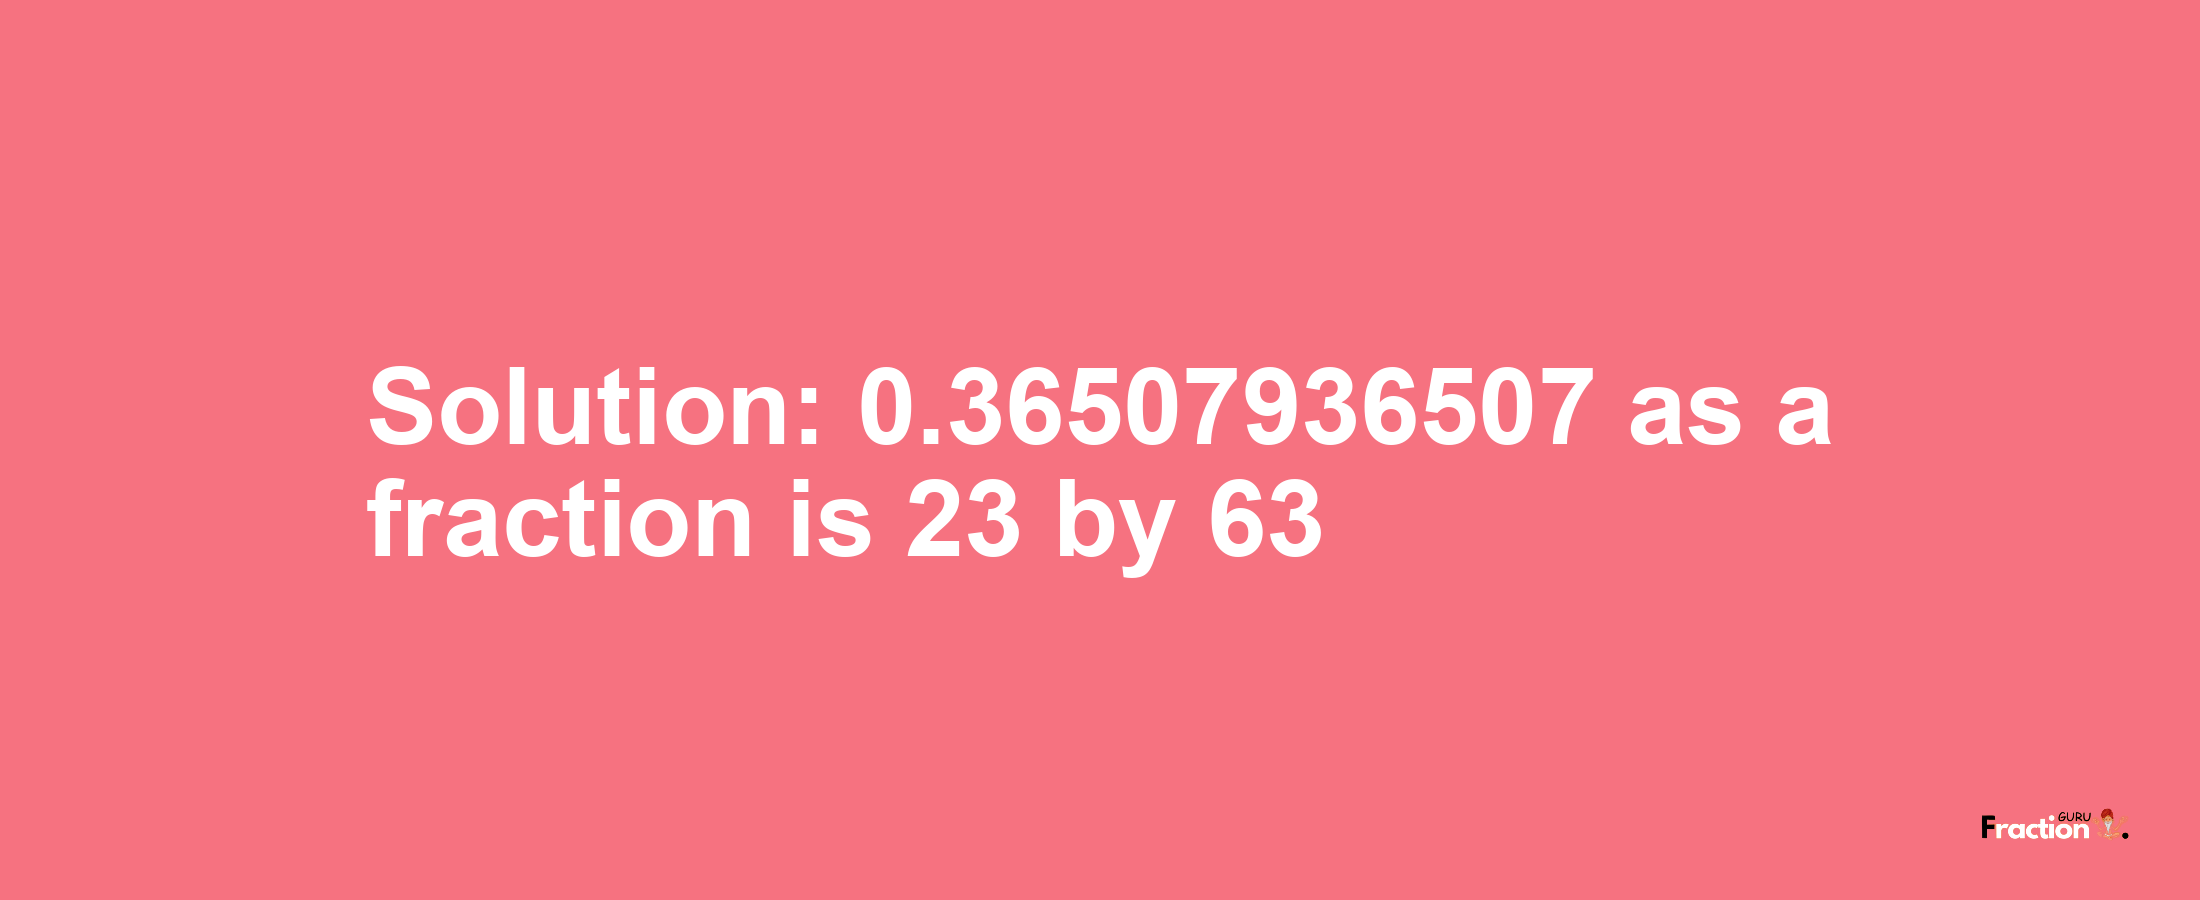 Solution:0.36507936507 as a fraction is 23/63